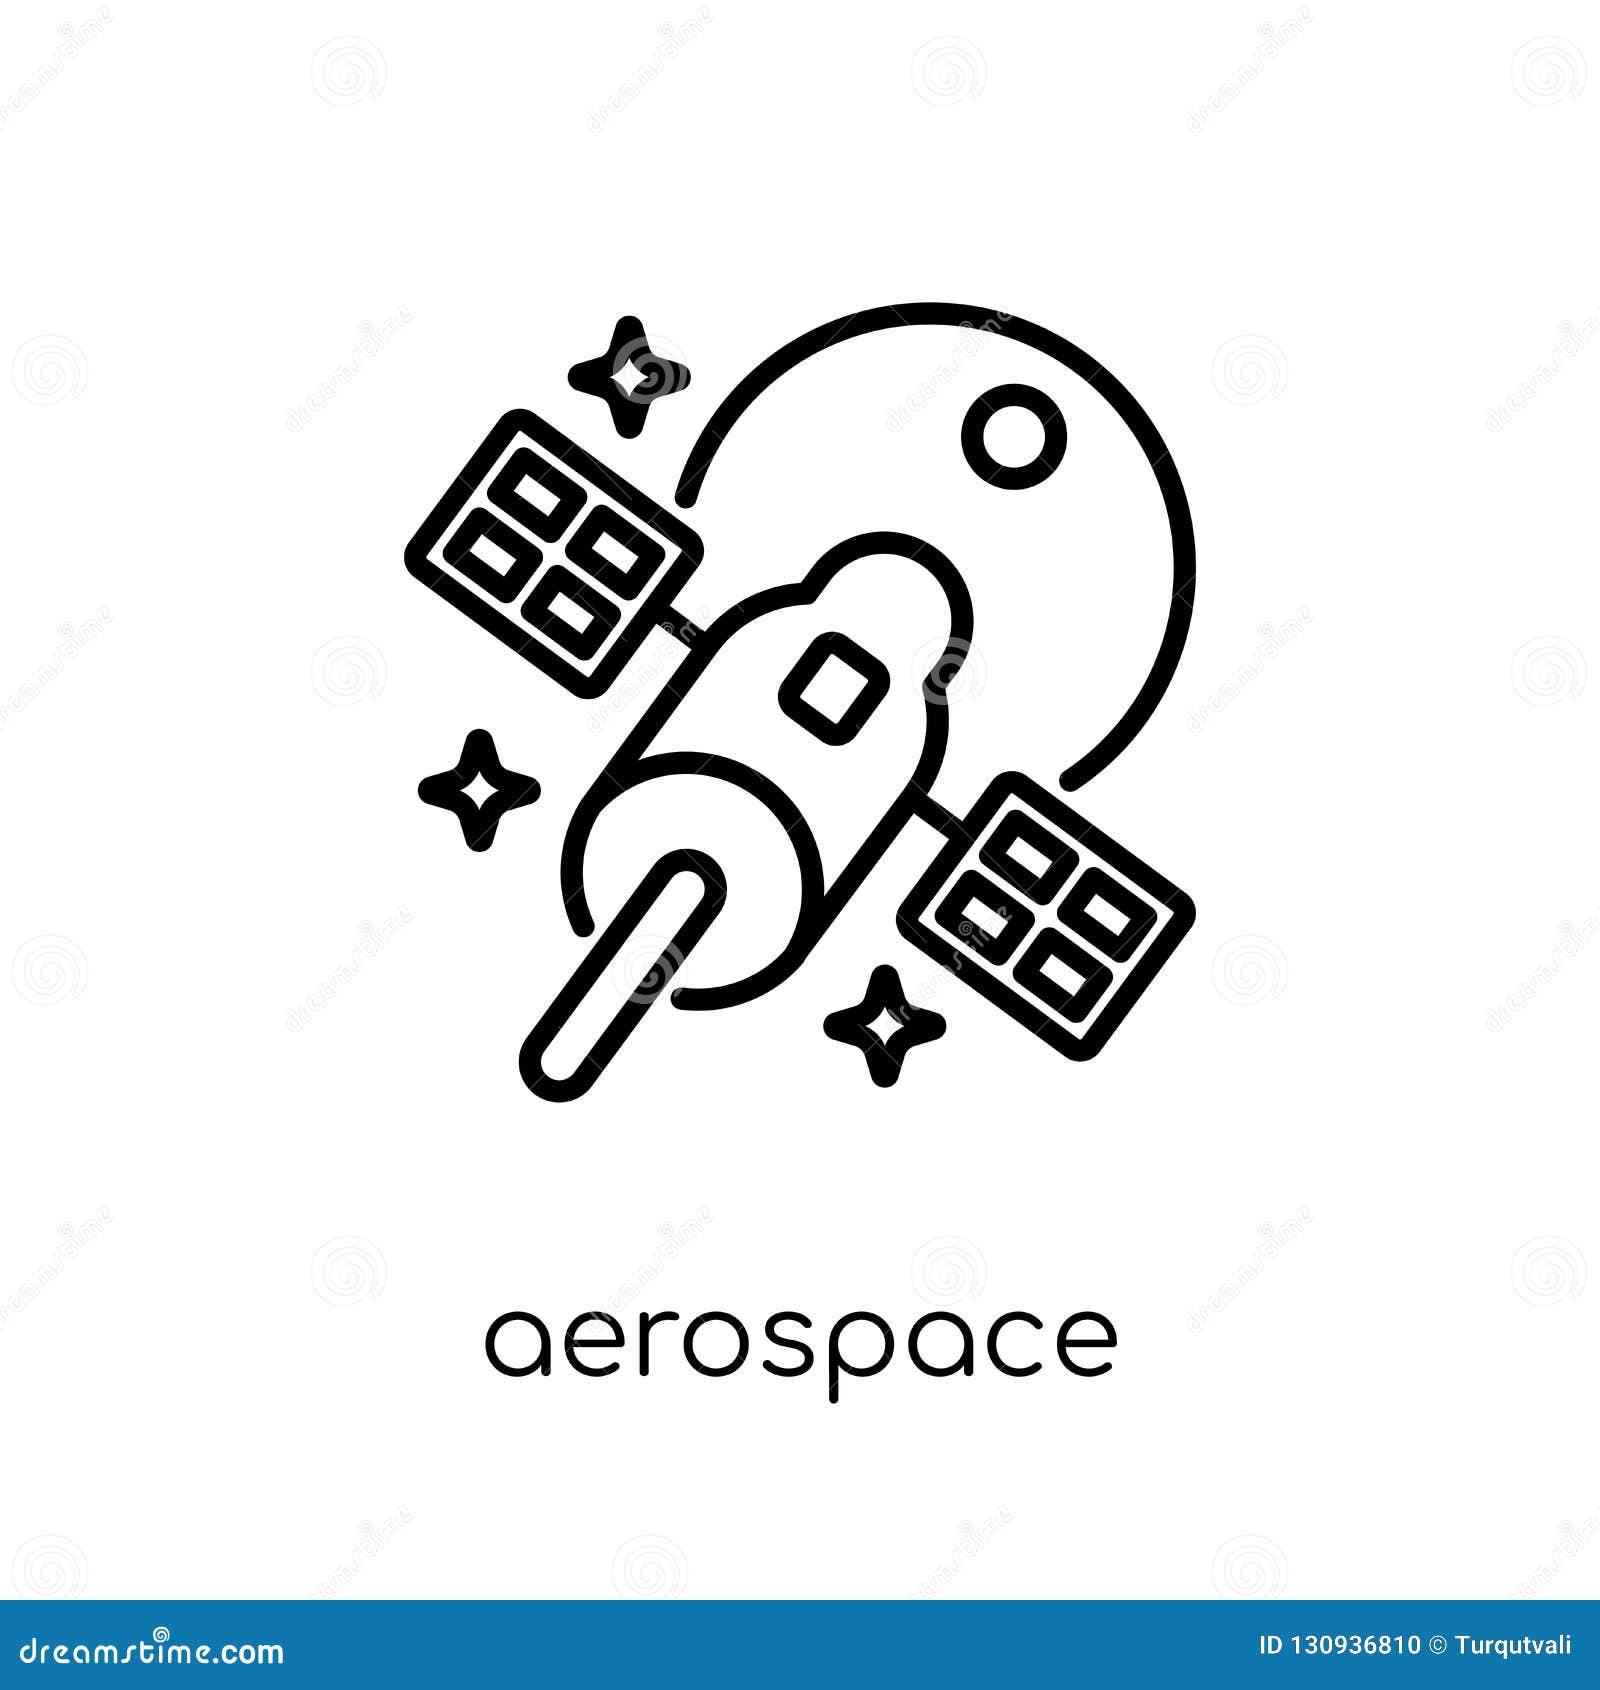 aerospace icon from astronomy collection.